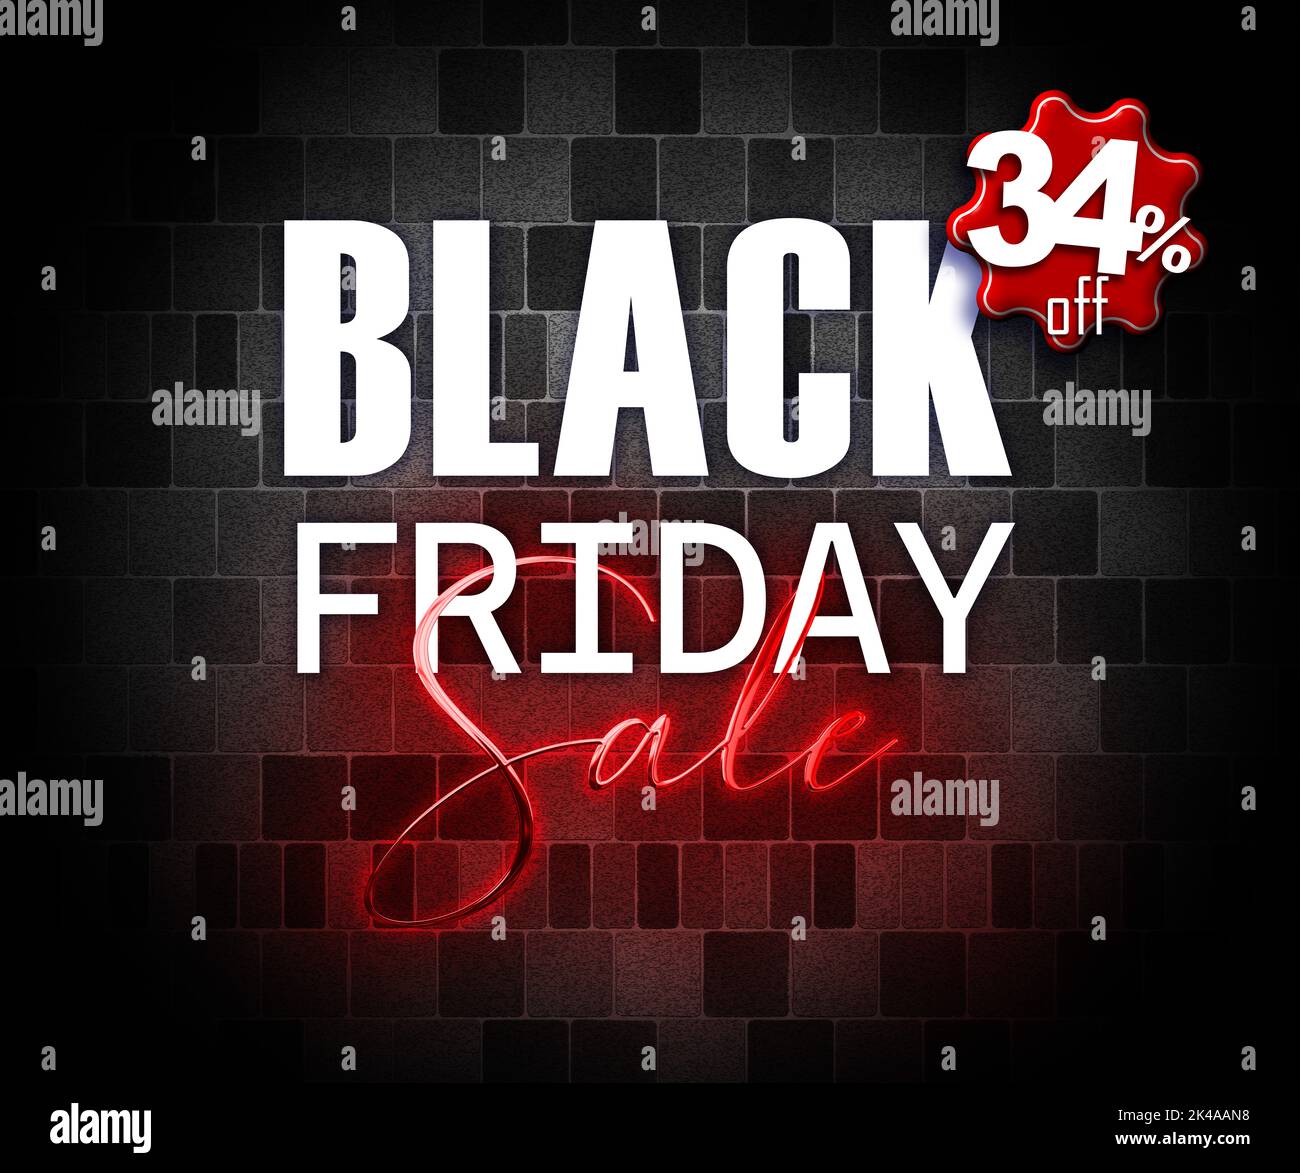 illustration with 3d elements black friday promotion banner 34 percent off sales increase Stock Photo